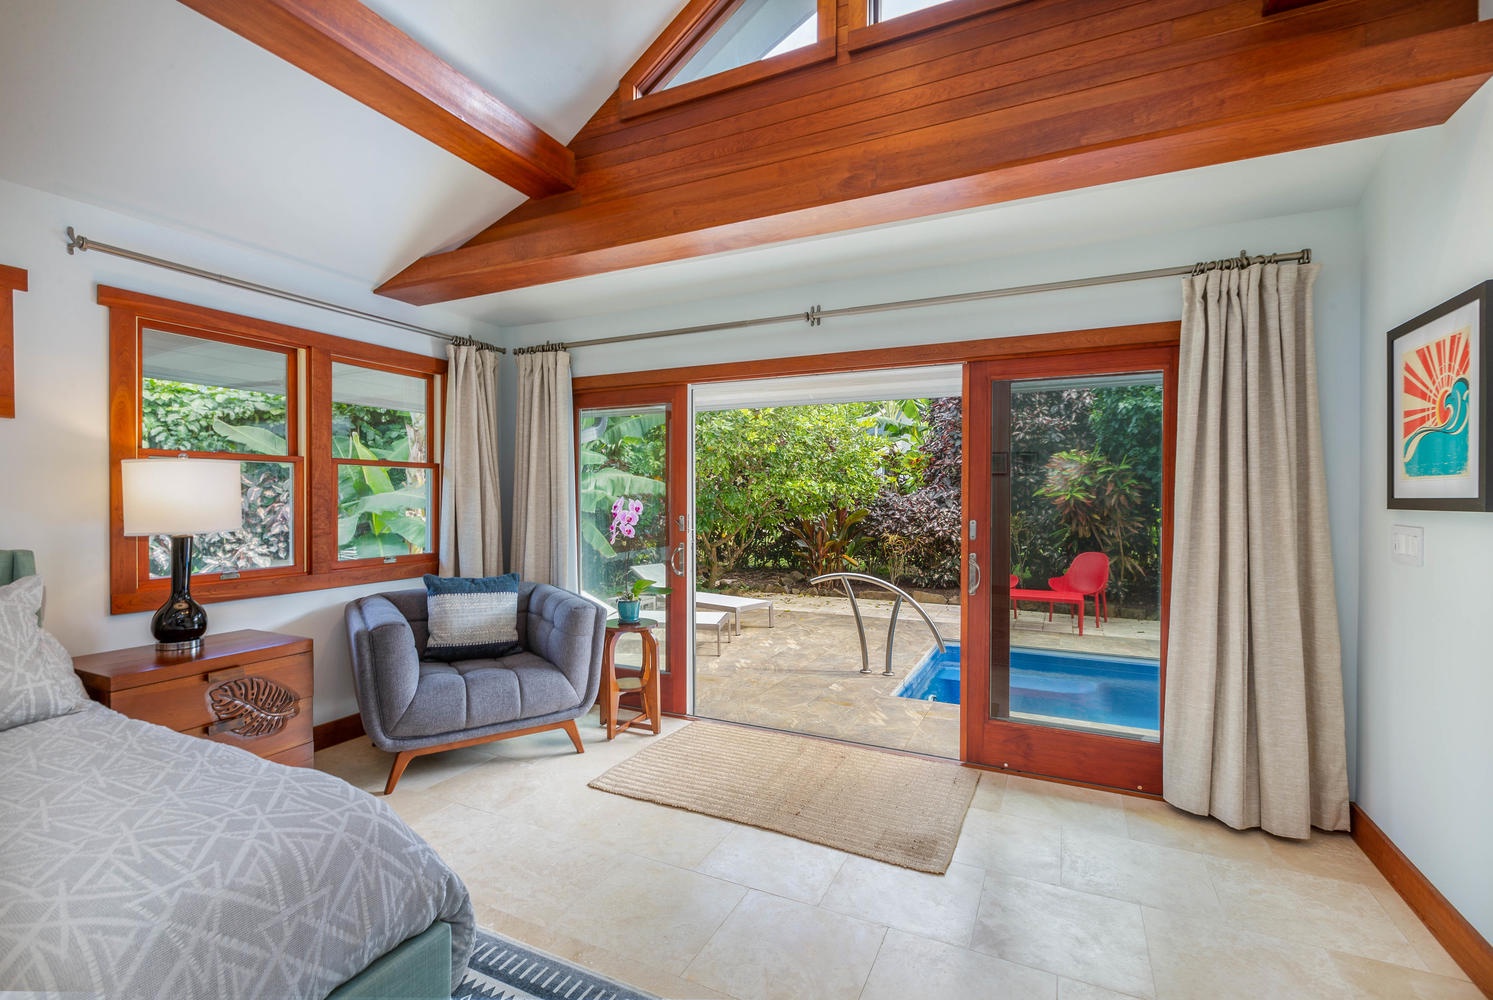 Princeville Vacation Rentals, Makana Lei - Convenient pool access from primary bedroom